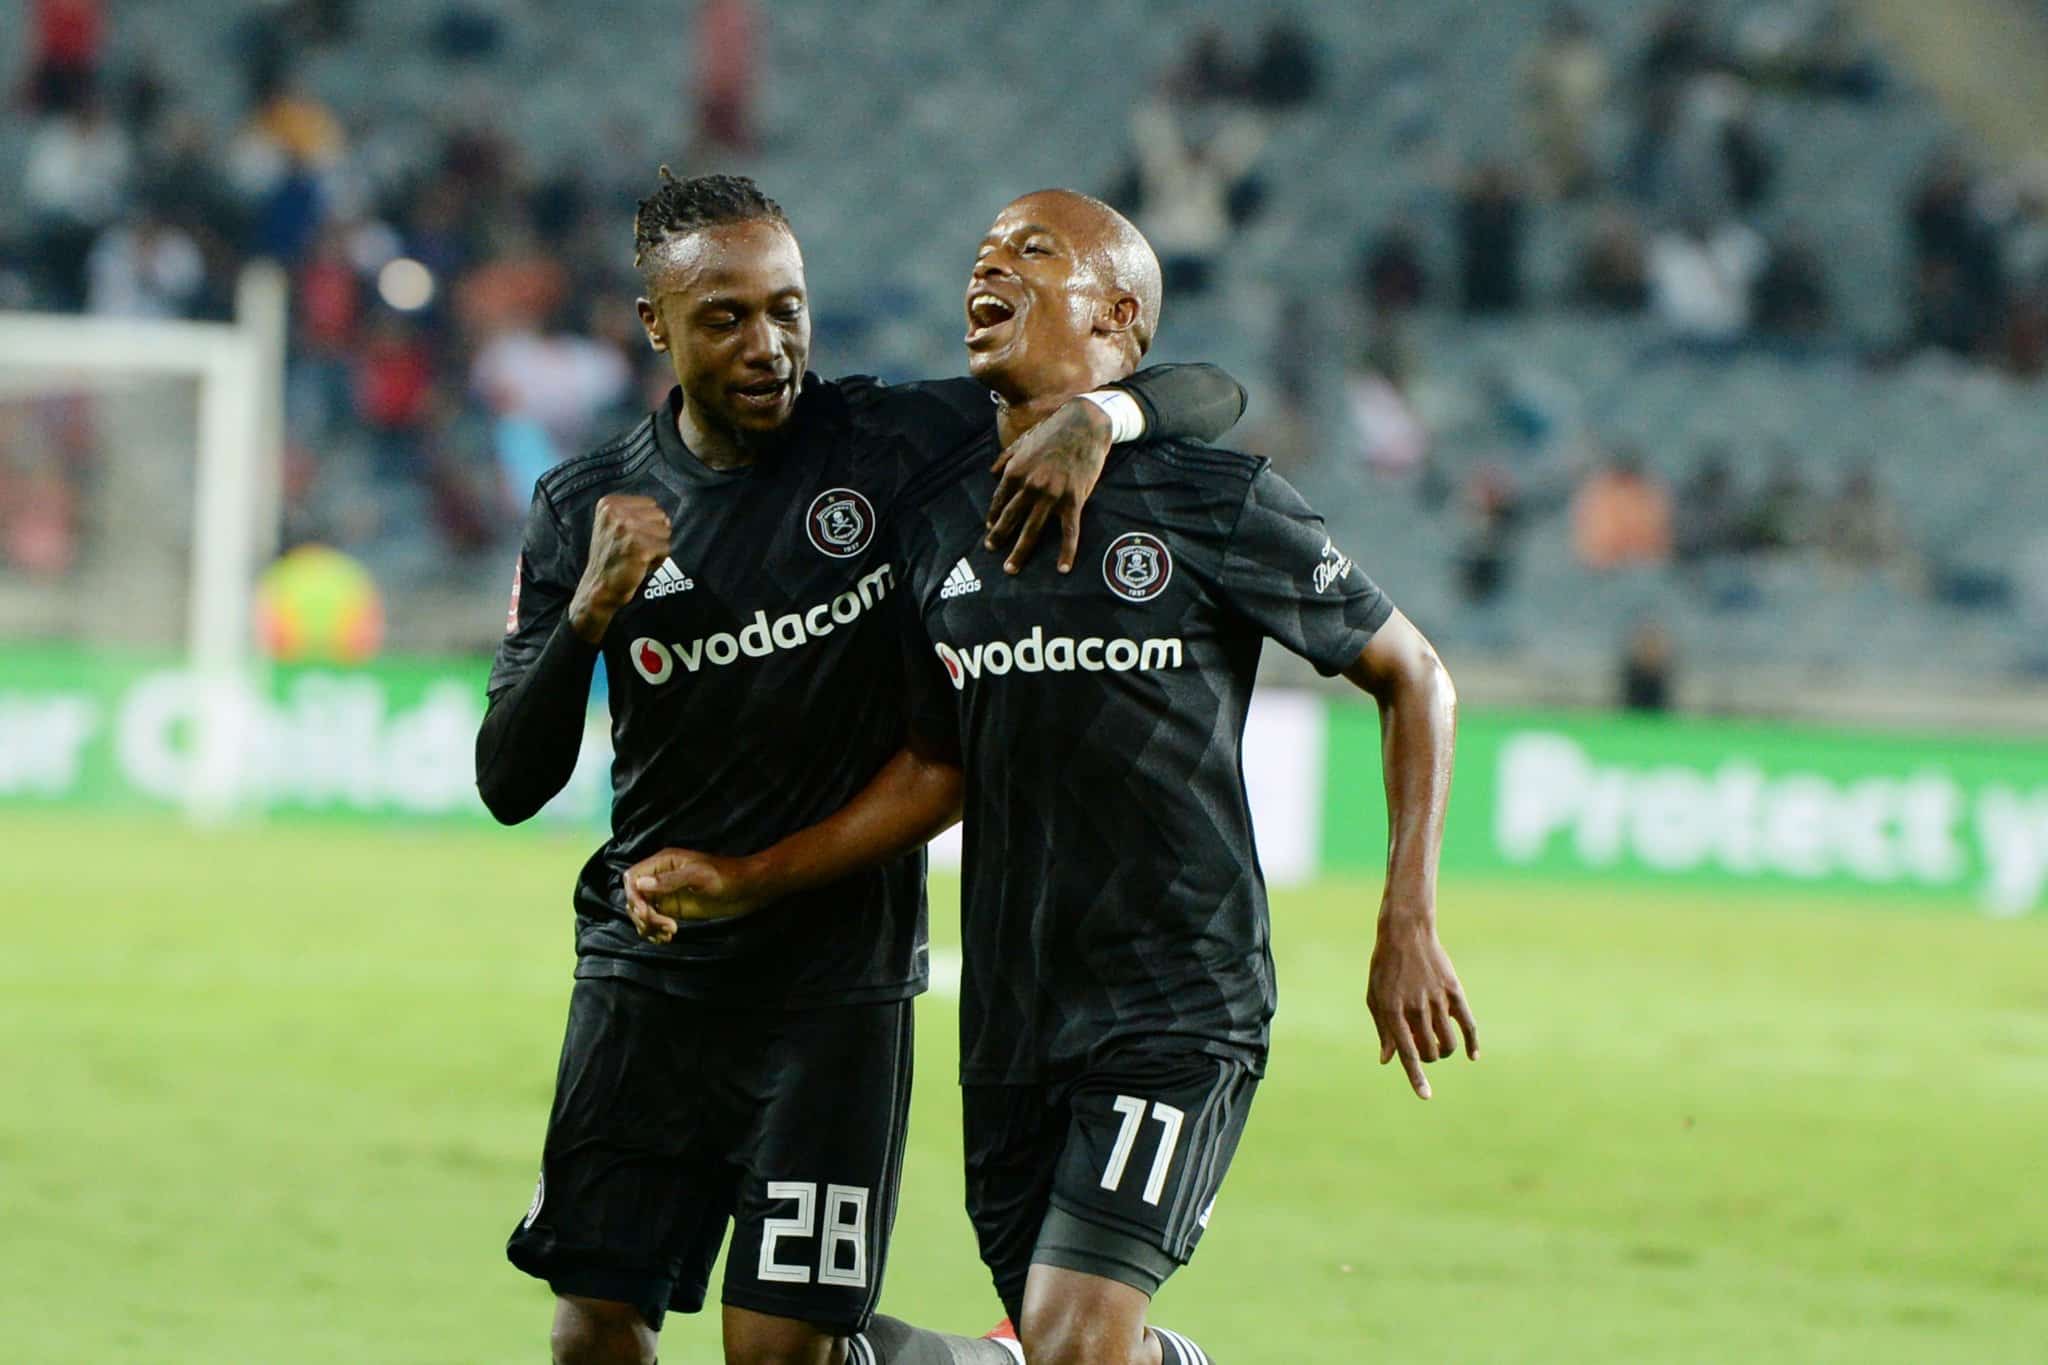 You are currently viewing Pirates move three points clear of Sundowns